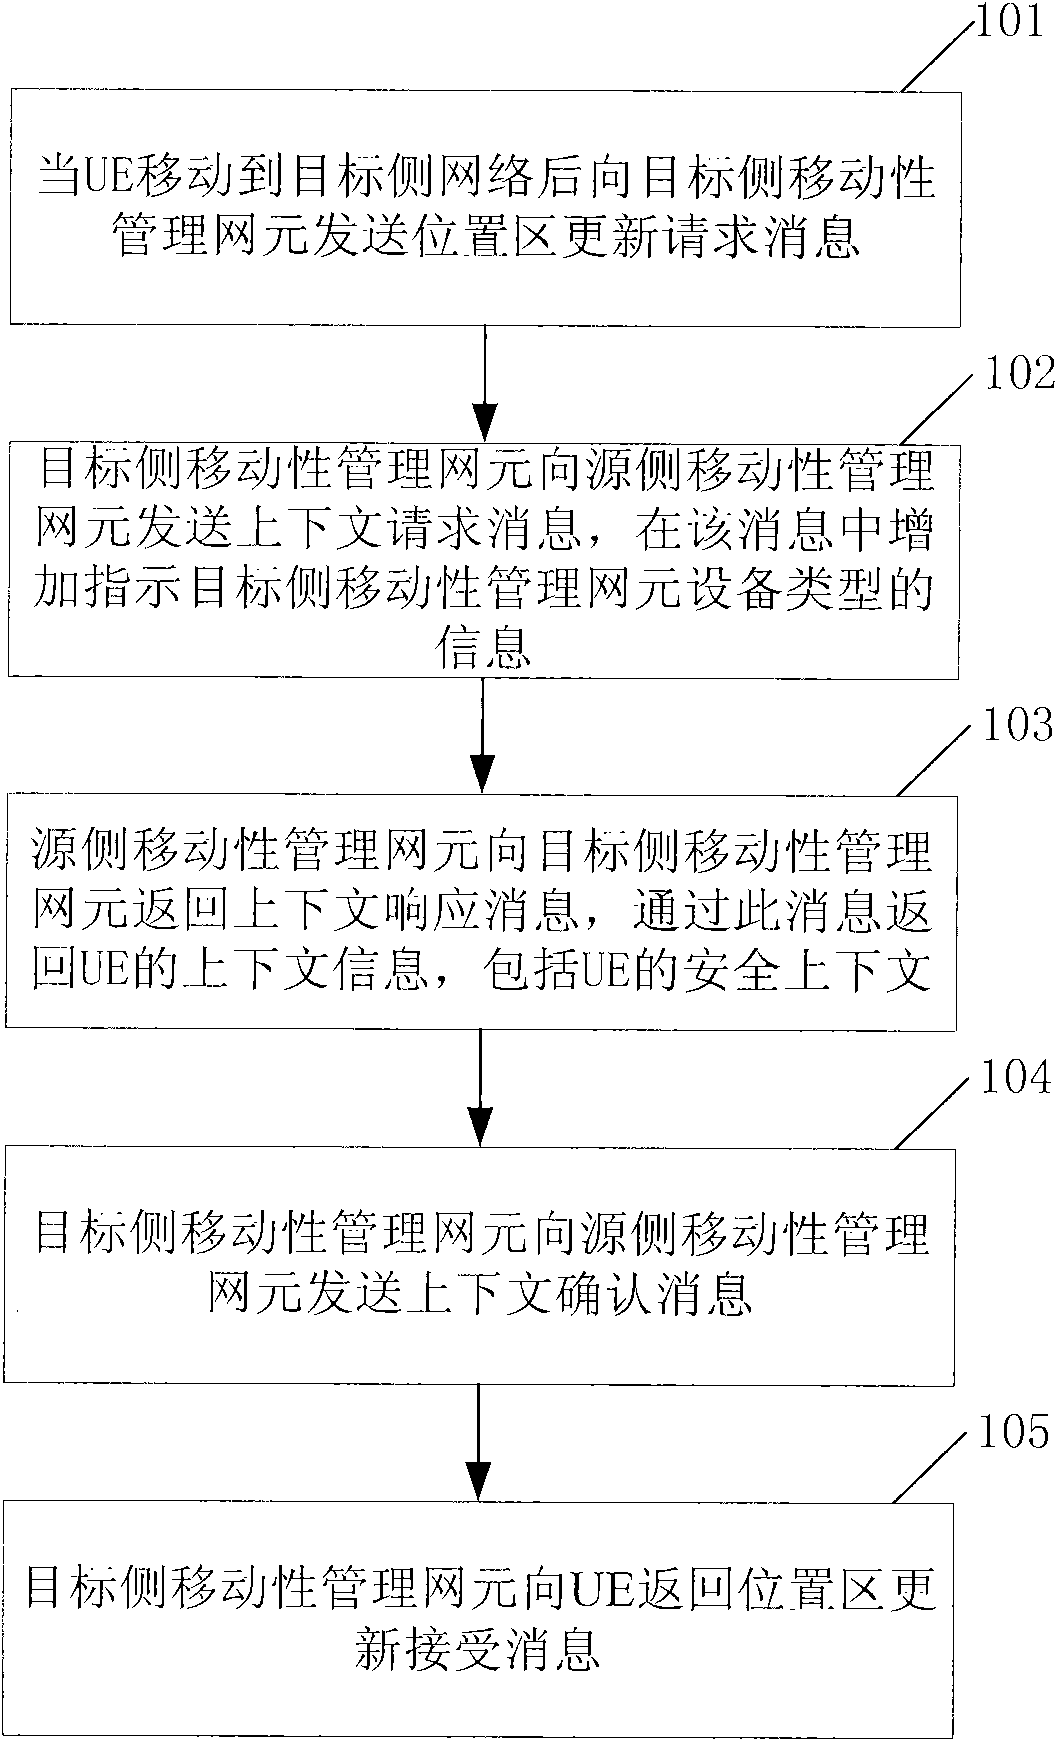 Method for providing security context, mobile management network element and mobile communication system